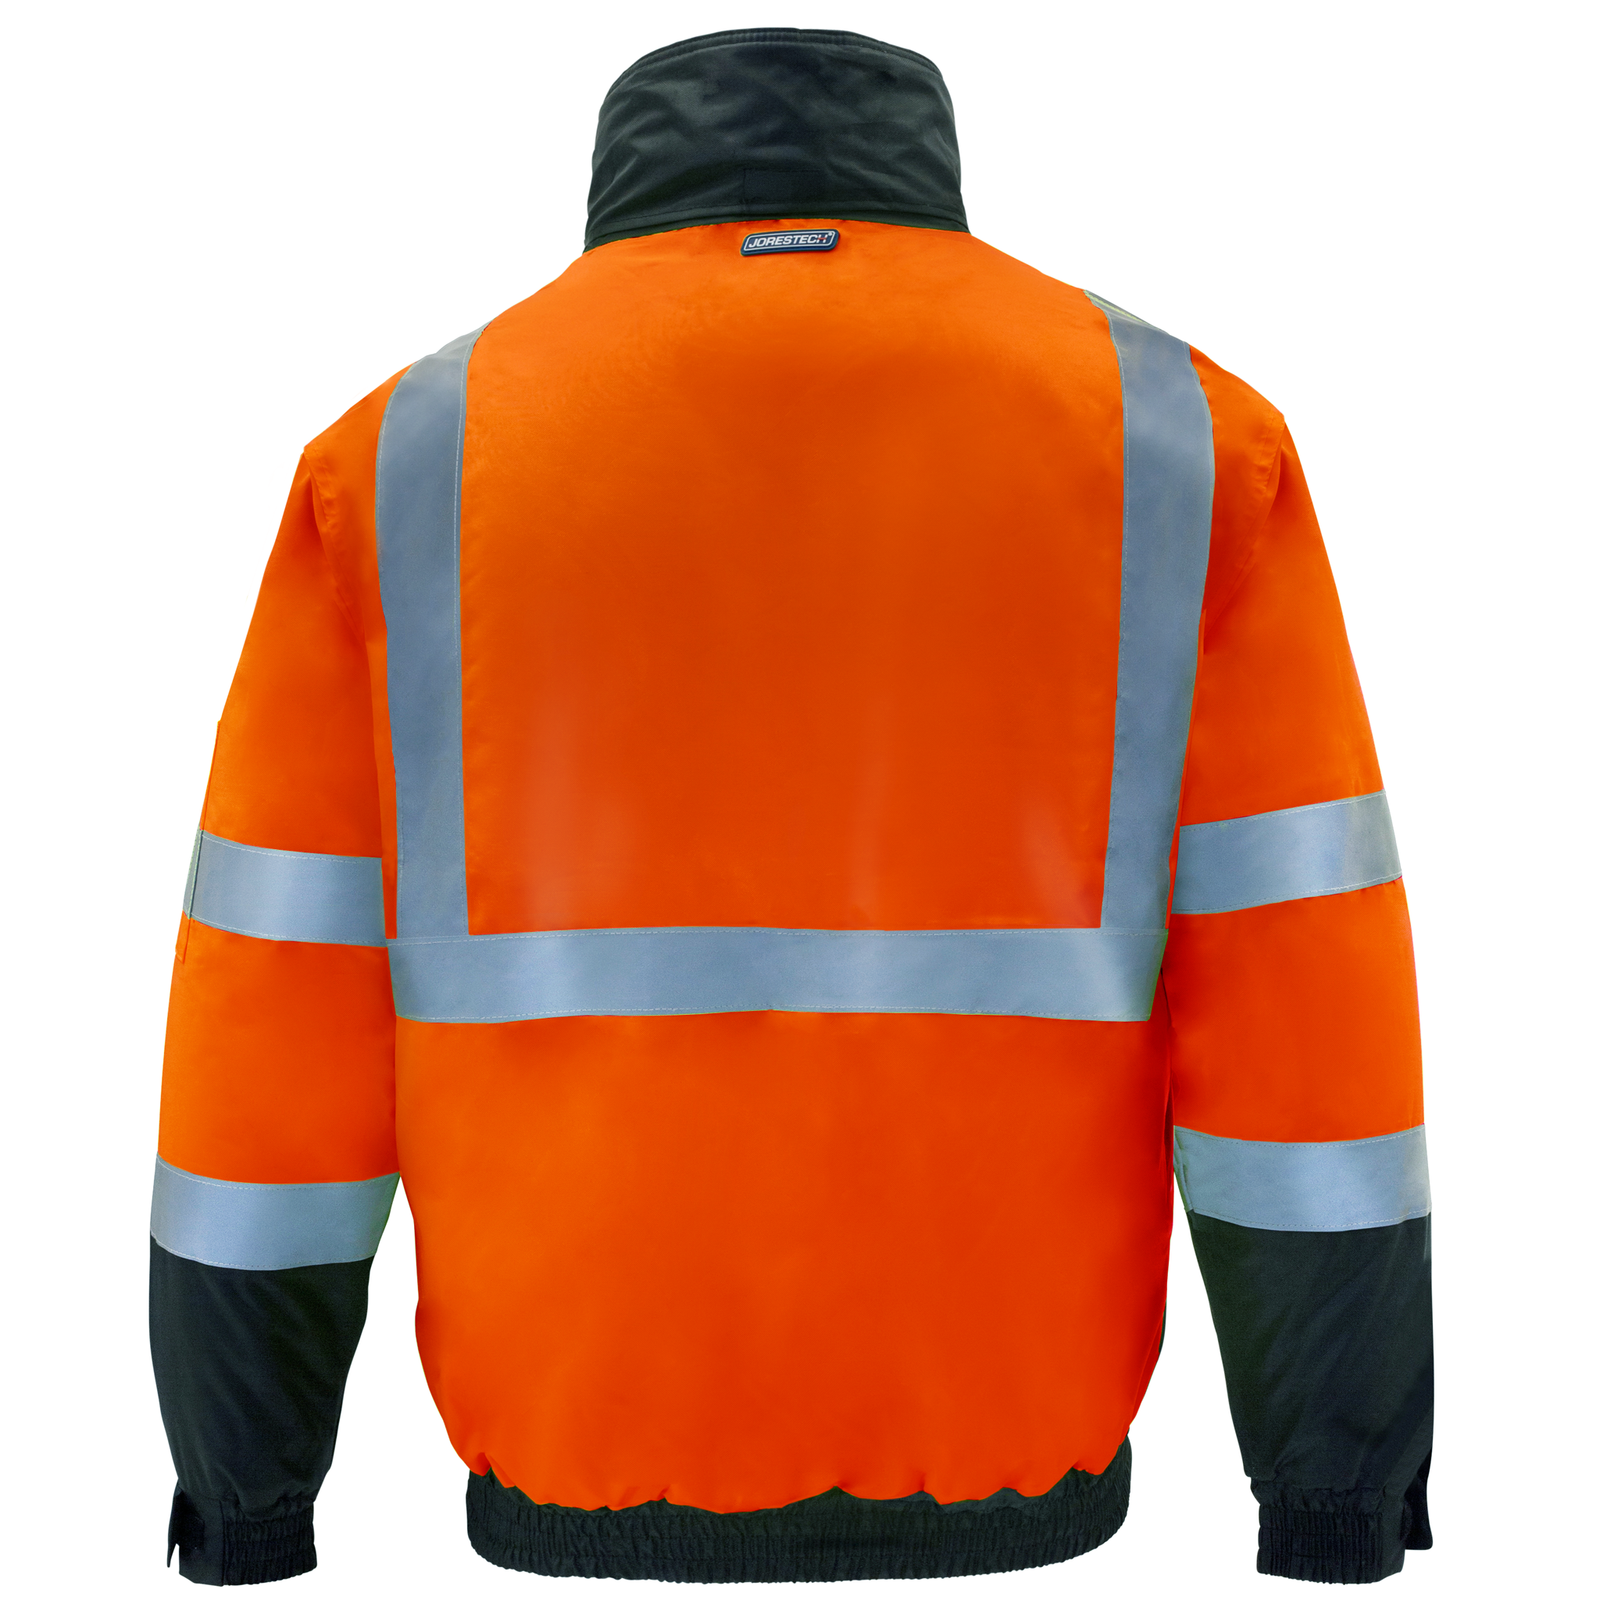 Back  of the orange and black hi vis JORESTECH safety insulated bomber jacket with reflective stripes and hoodie ANSI compliant type R class 3